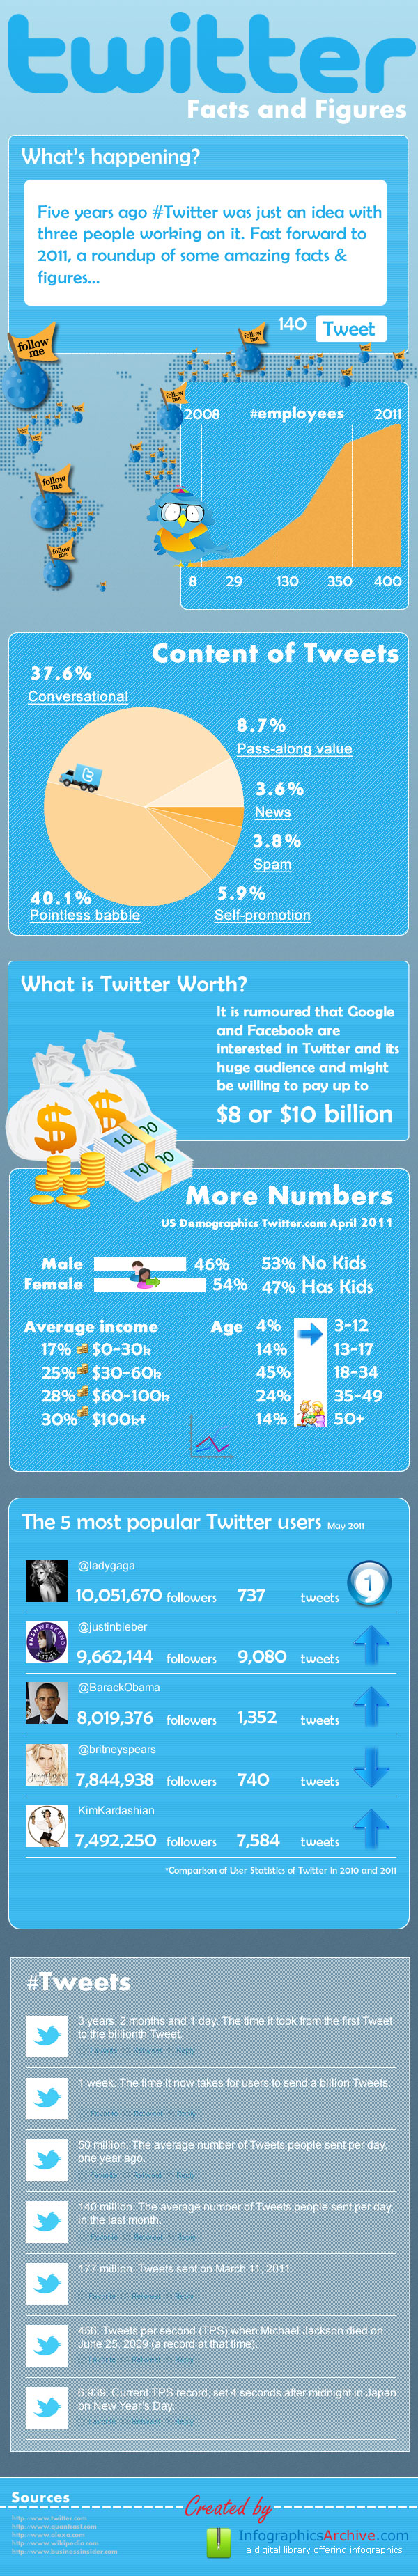 Twitter Facts And Figures Infographic